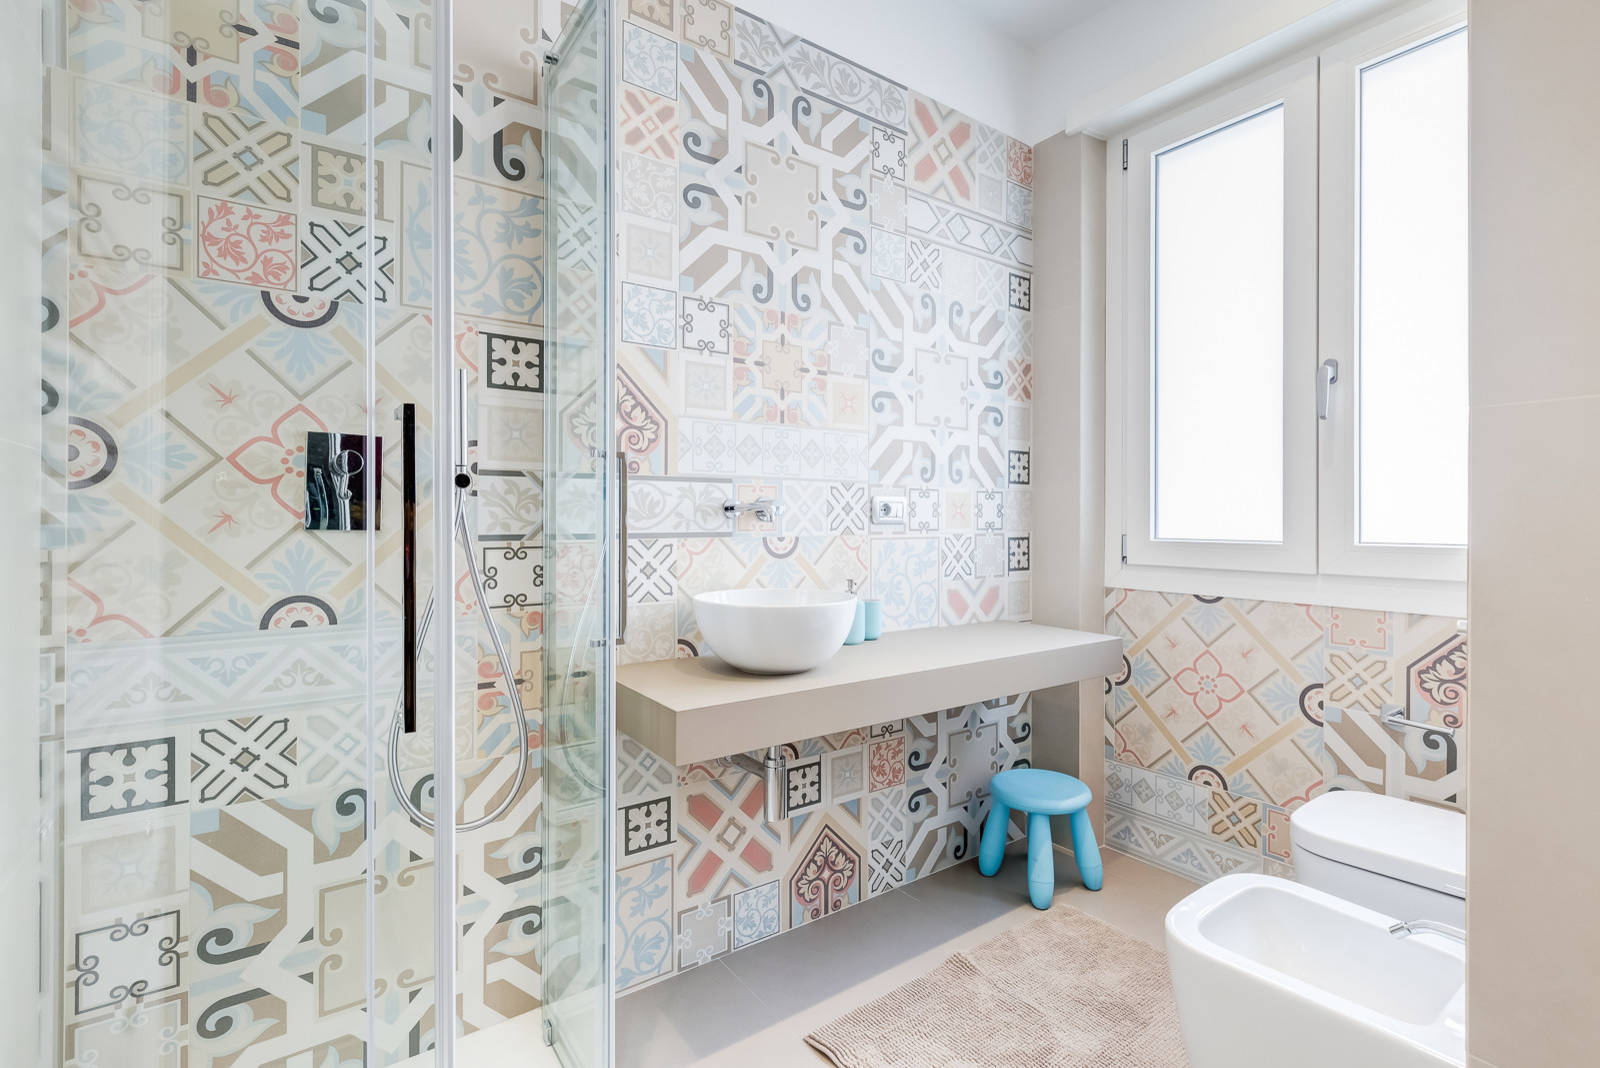 Are you ready for the bidet? - Giovanni's Tile Design